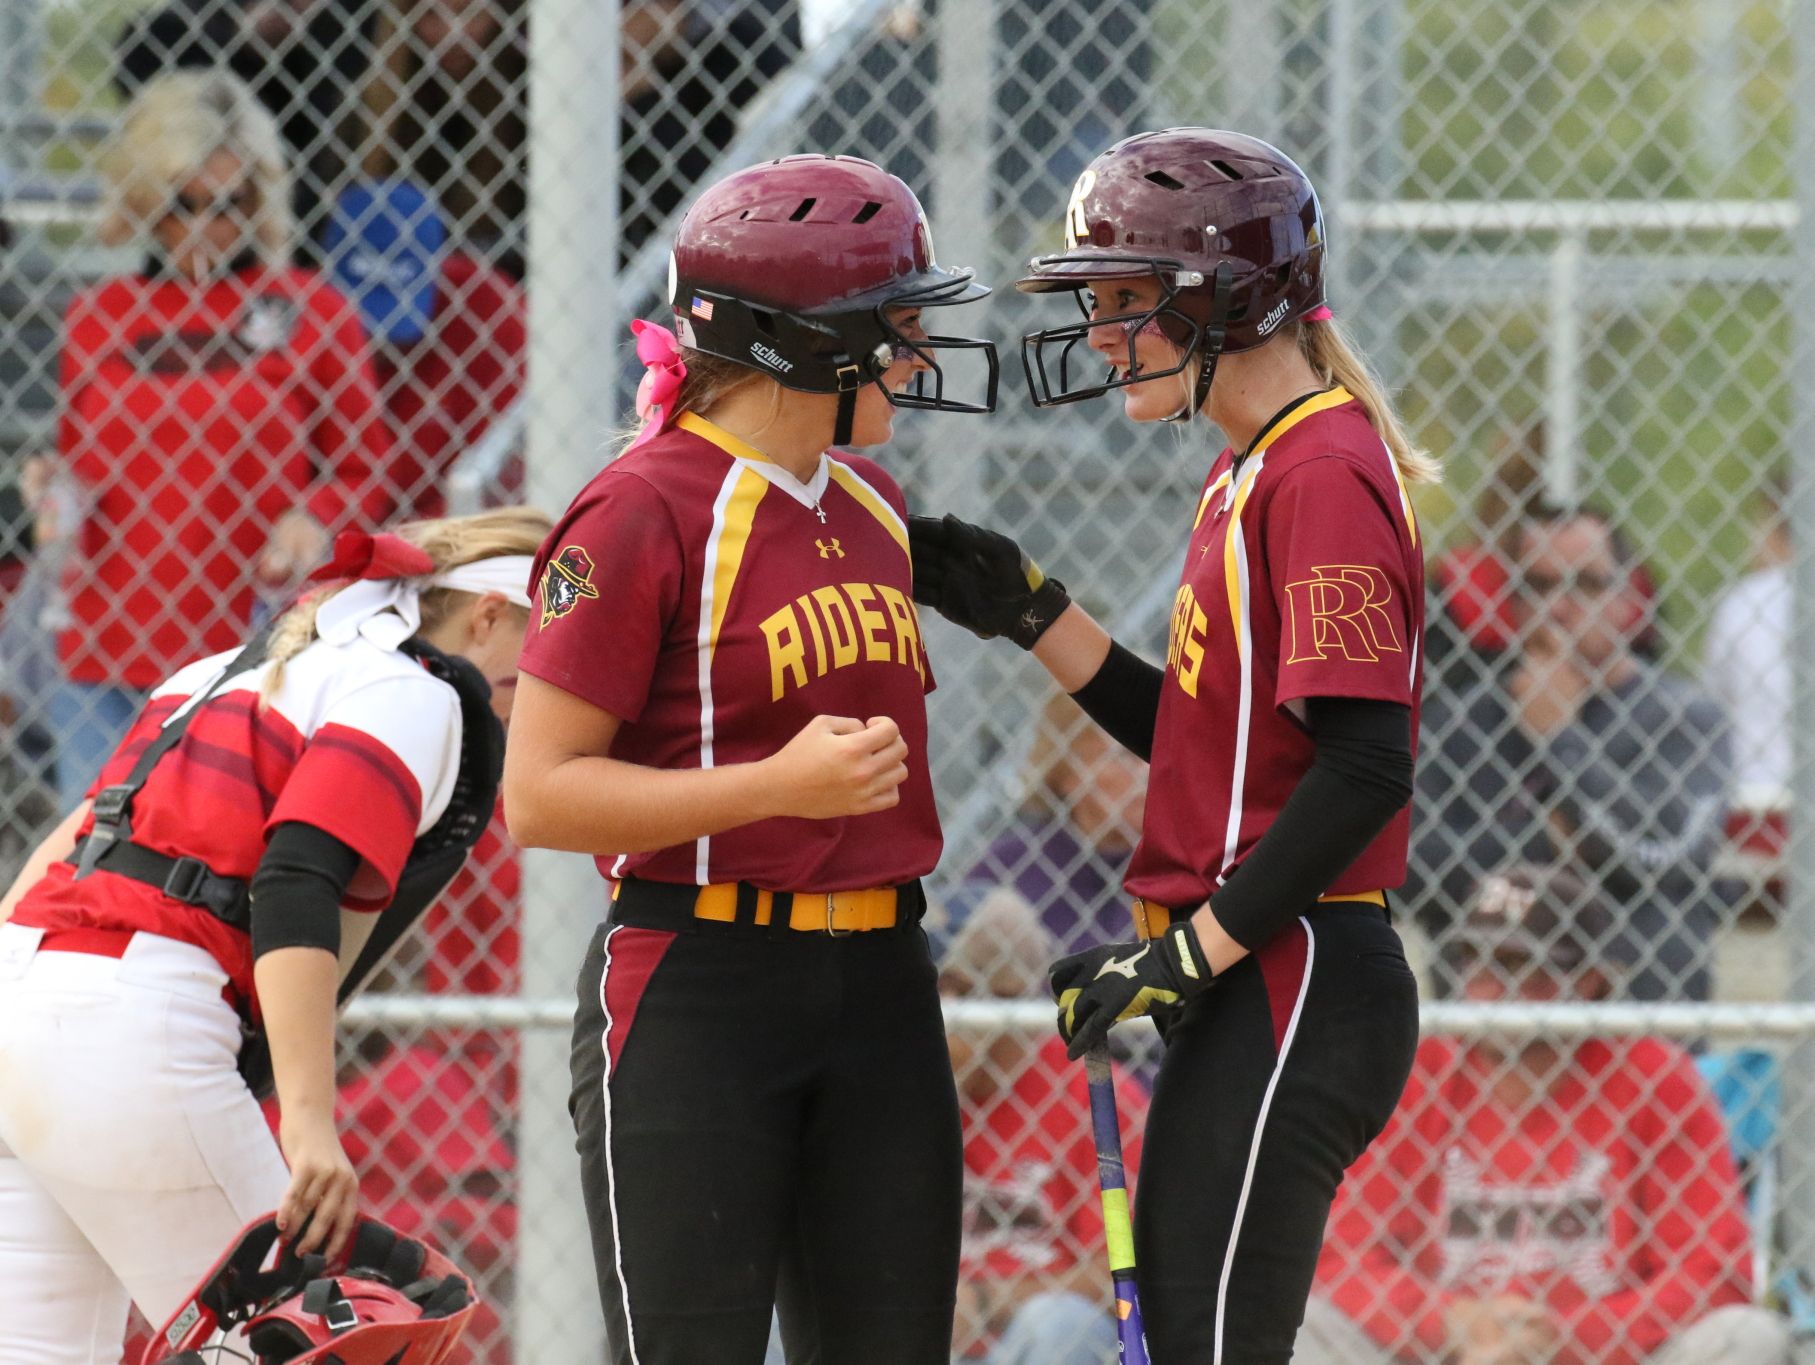 Roosevelt's Macy Schroedermeier (L) celebrates with Abby Schultz after scoring a run in the State Championship game against Brandon Valley at Sherman Park.